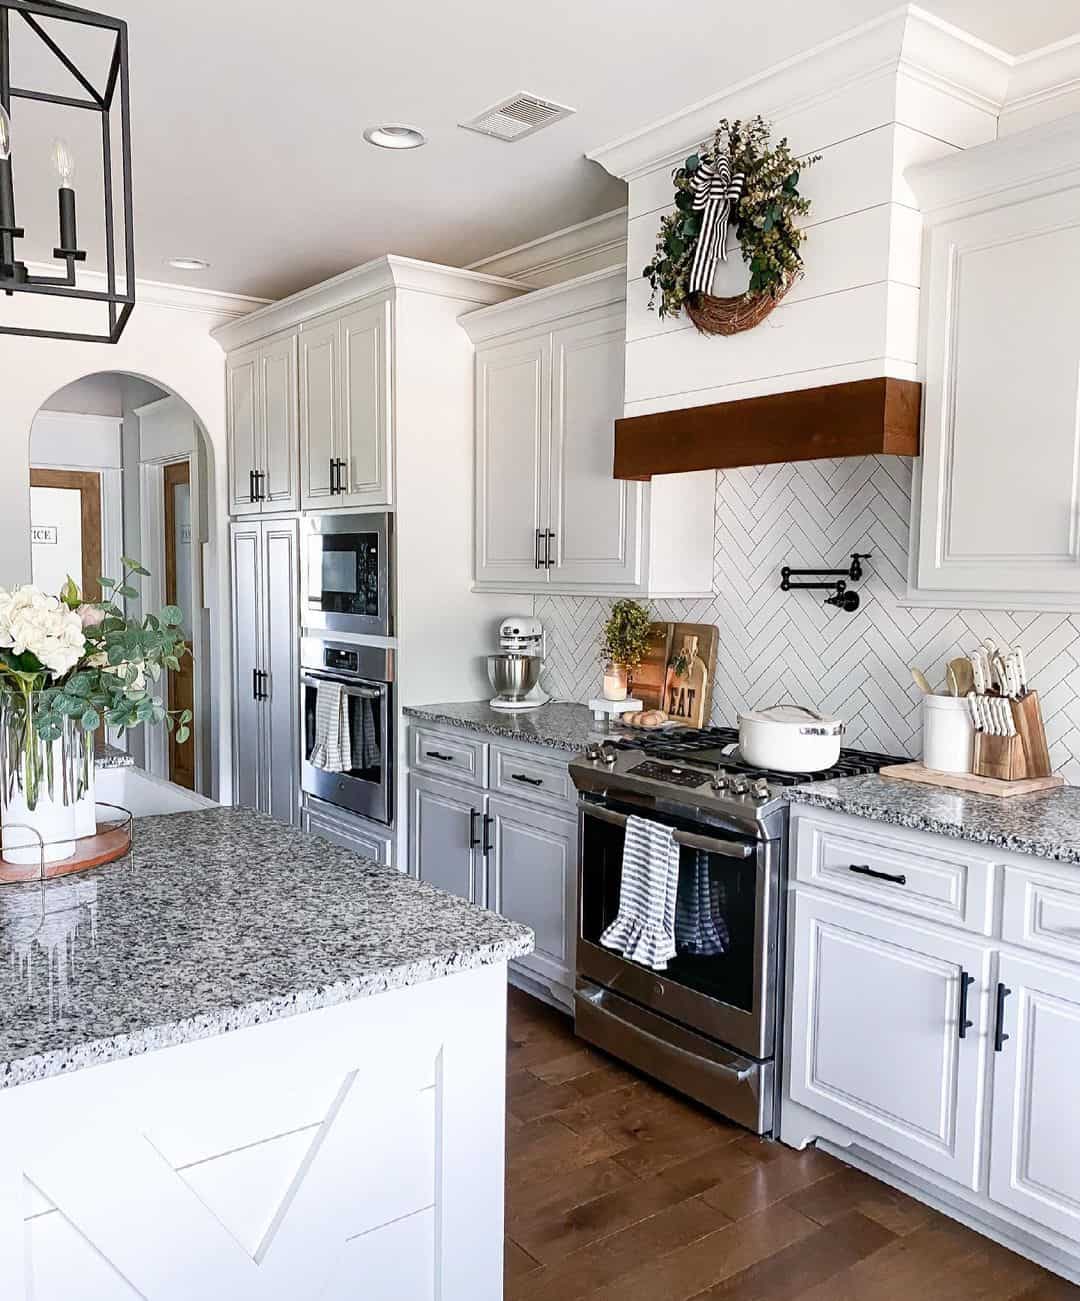 A white shiplap range hood is mounted above a stainless steel gas range. The range is fitted between white cabinets with a herringbone backsplash that has grey grout.